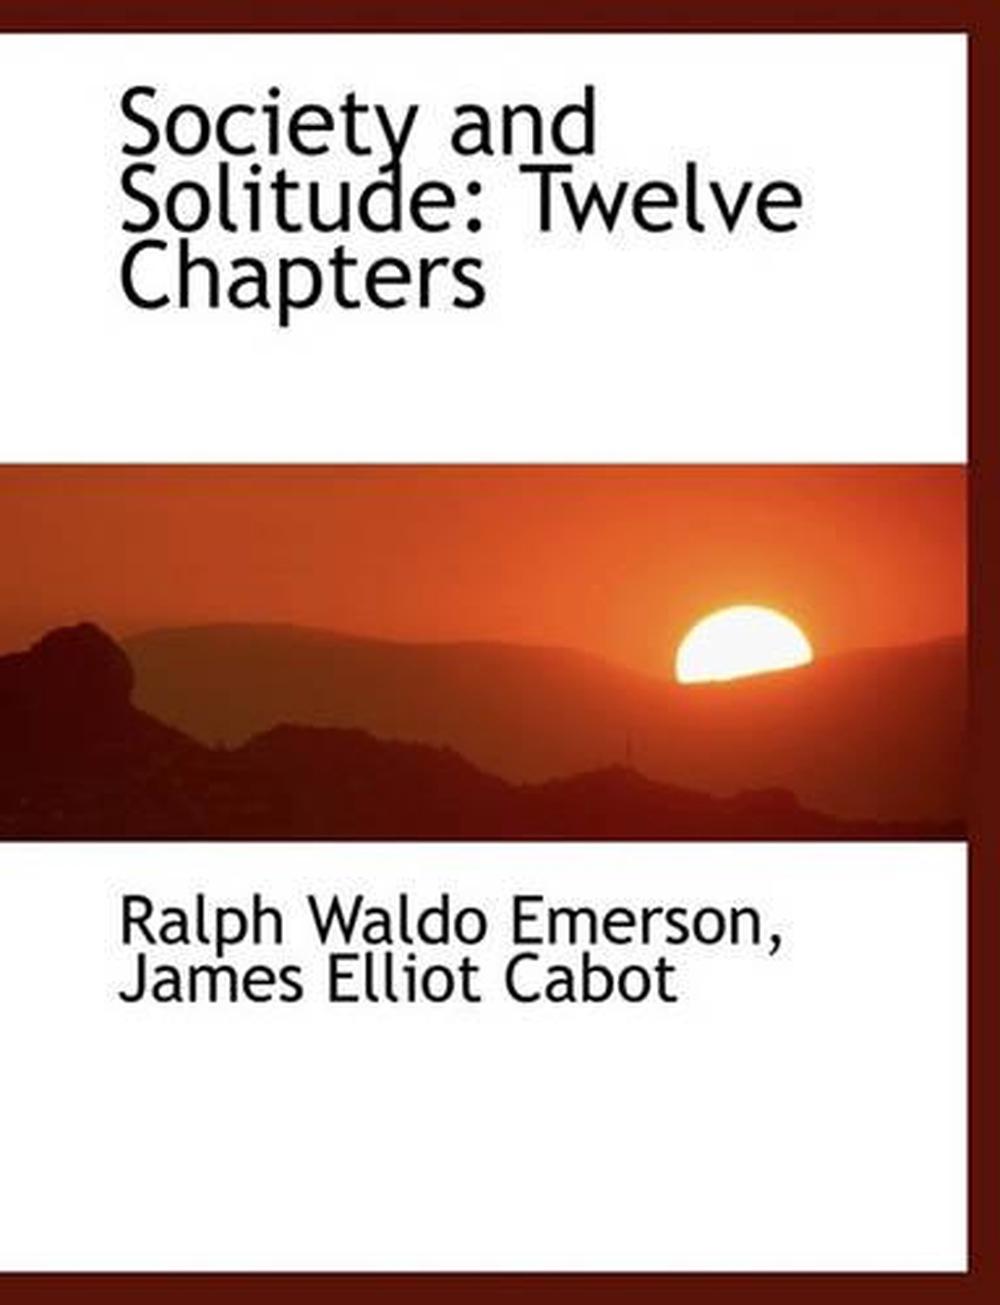 Society and Solitude: Twelve Chapters by Ralph Waldo Emerson (English